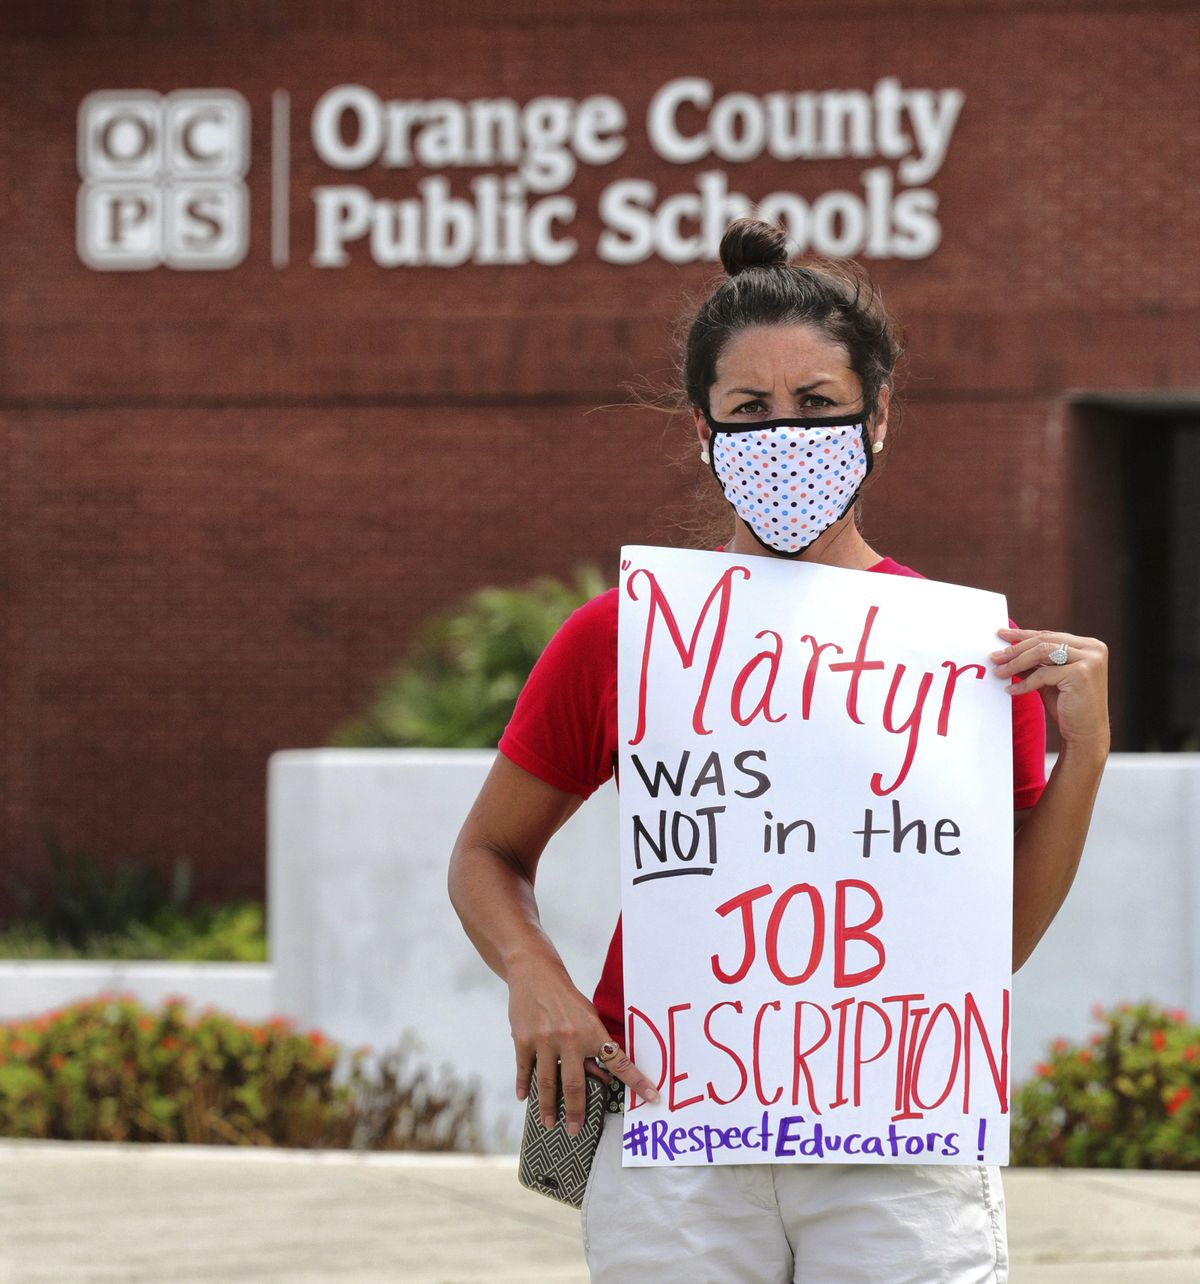 FILE - In this Tuesday, July 7, 2020 file photo, Rachel Bardes holds a sign in front of the Orange County Public Schools headquarters as teachers protest with a car parade around the administration center in downtown Orlando, Fla. As pressure mounts for teachers to return to their classrooms this fall, concerns about the pandemic are pushing many toward alternatives, including career changes, as some mobilize to delay school reopenings in areas hardest hit by the coronavirus. Teachers unions have begun pushing back on what they see as unnecessarily aggressive timetables for reopening.  (Joe Burbank)